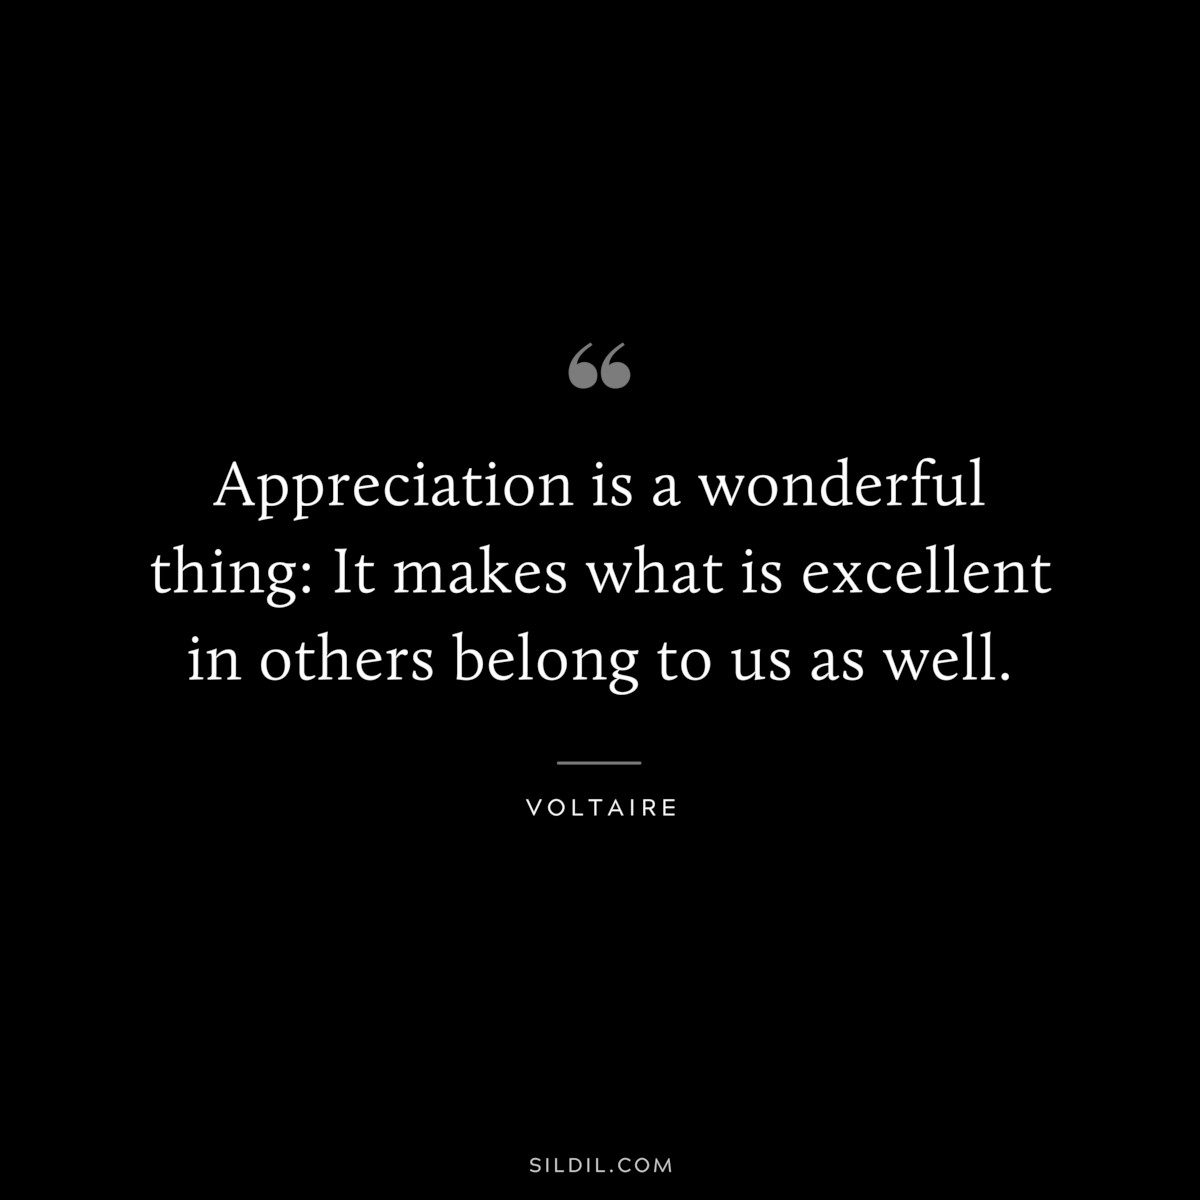 Appreciation is a wonderful thing: It makes what is excellent in others belong to us as well. ― Voltaire